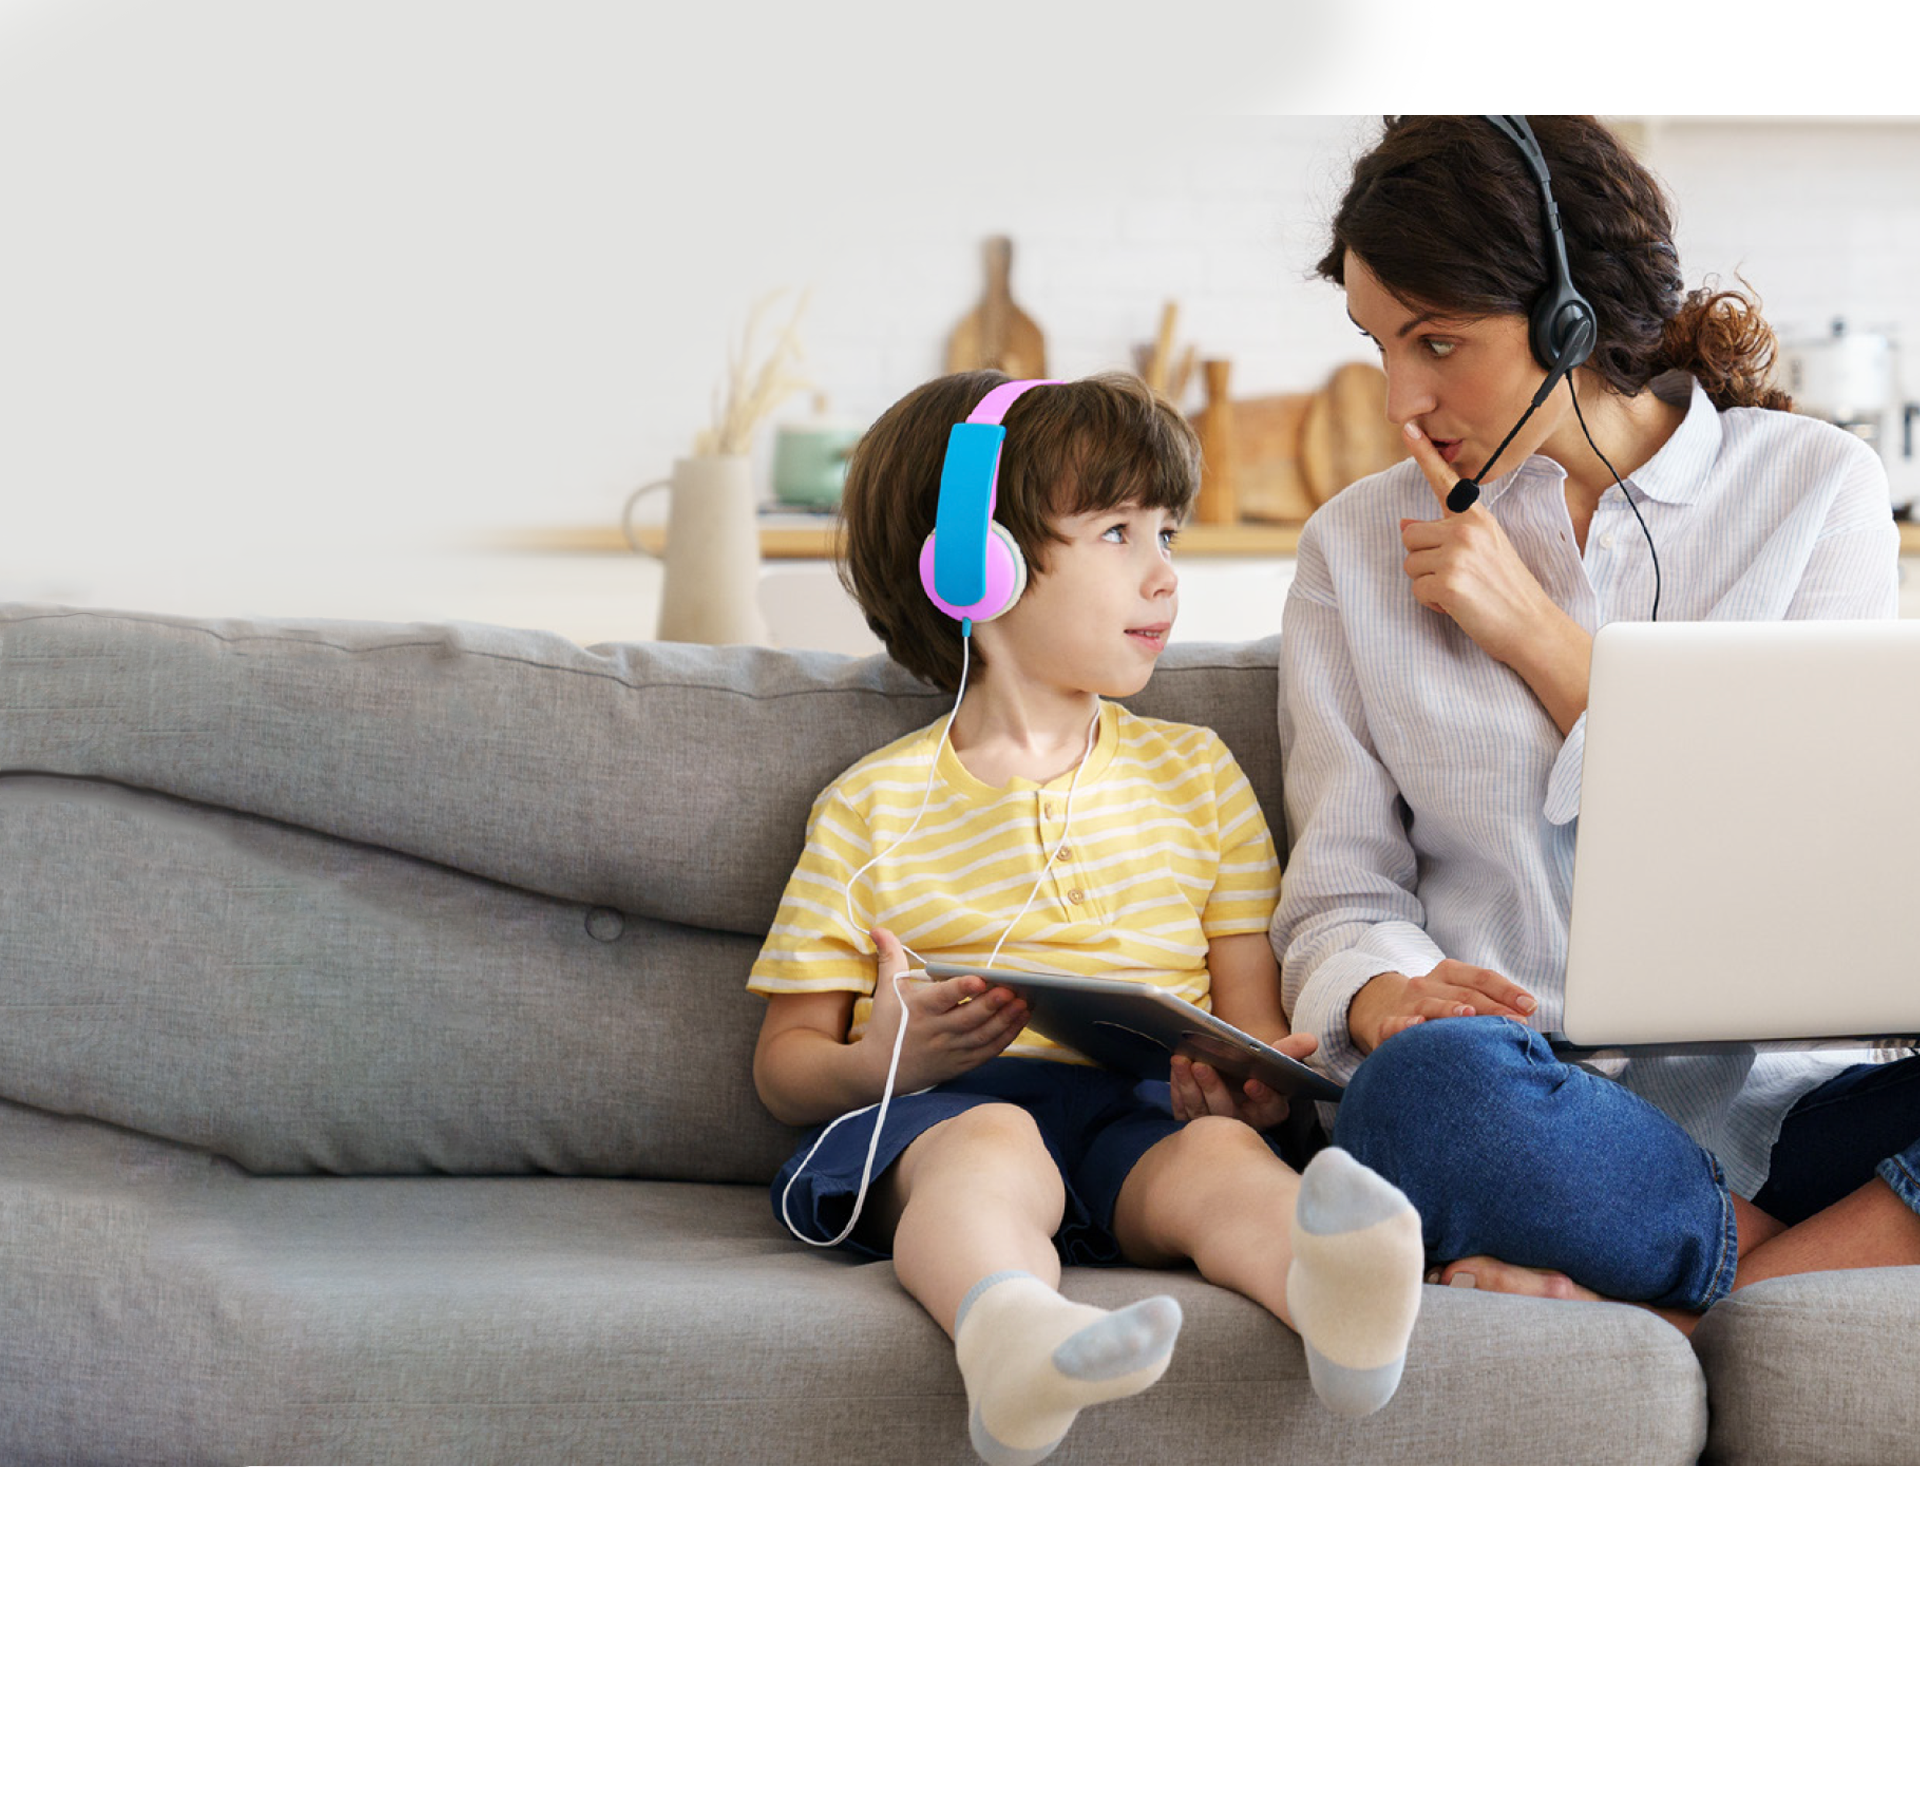 A woman on her laptop and headset is shushing her child who also has headphones on.